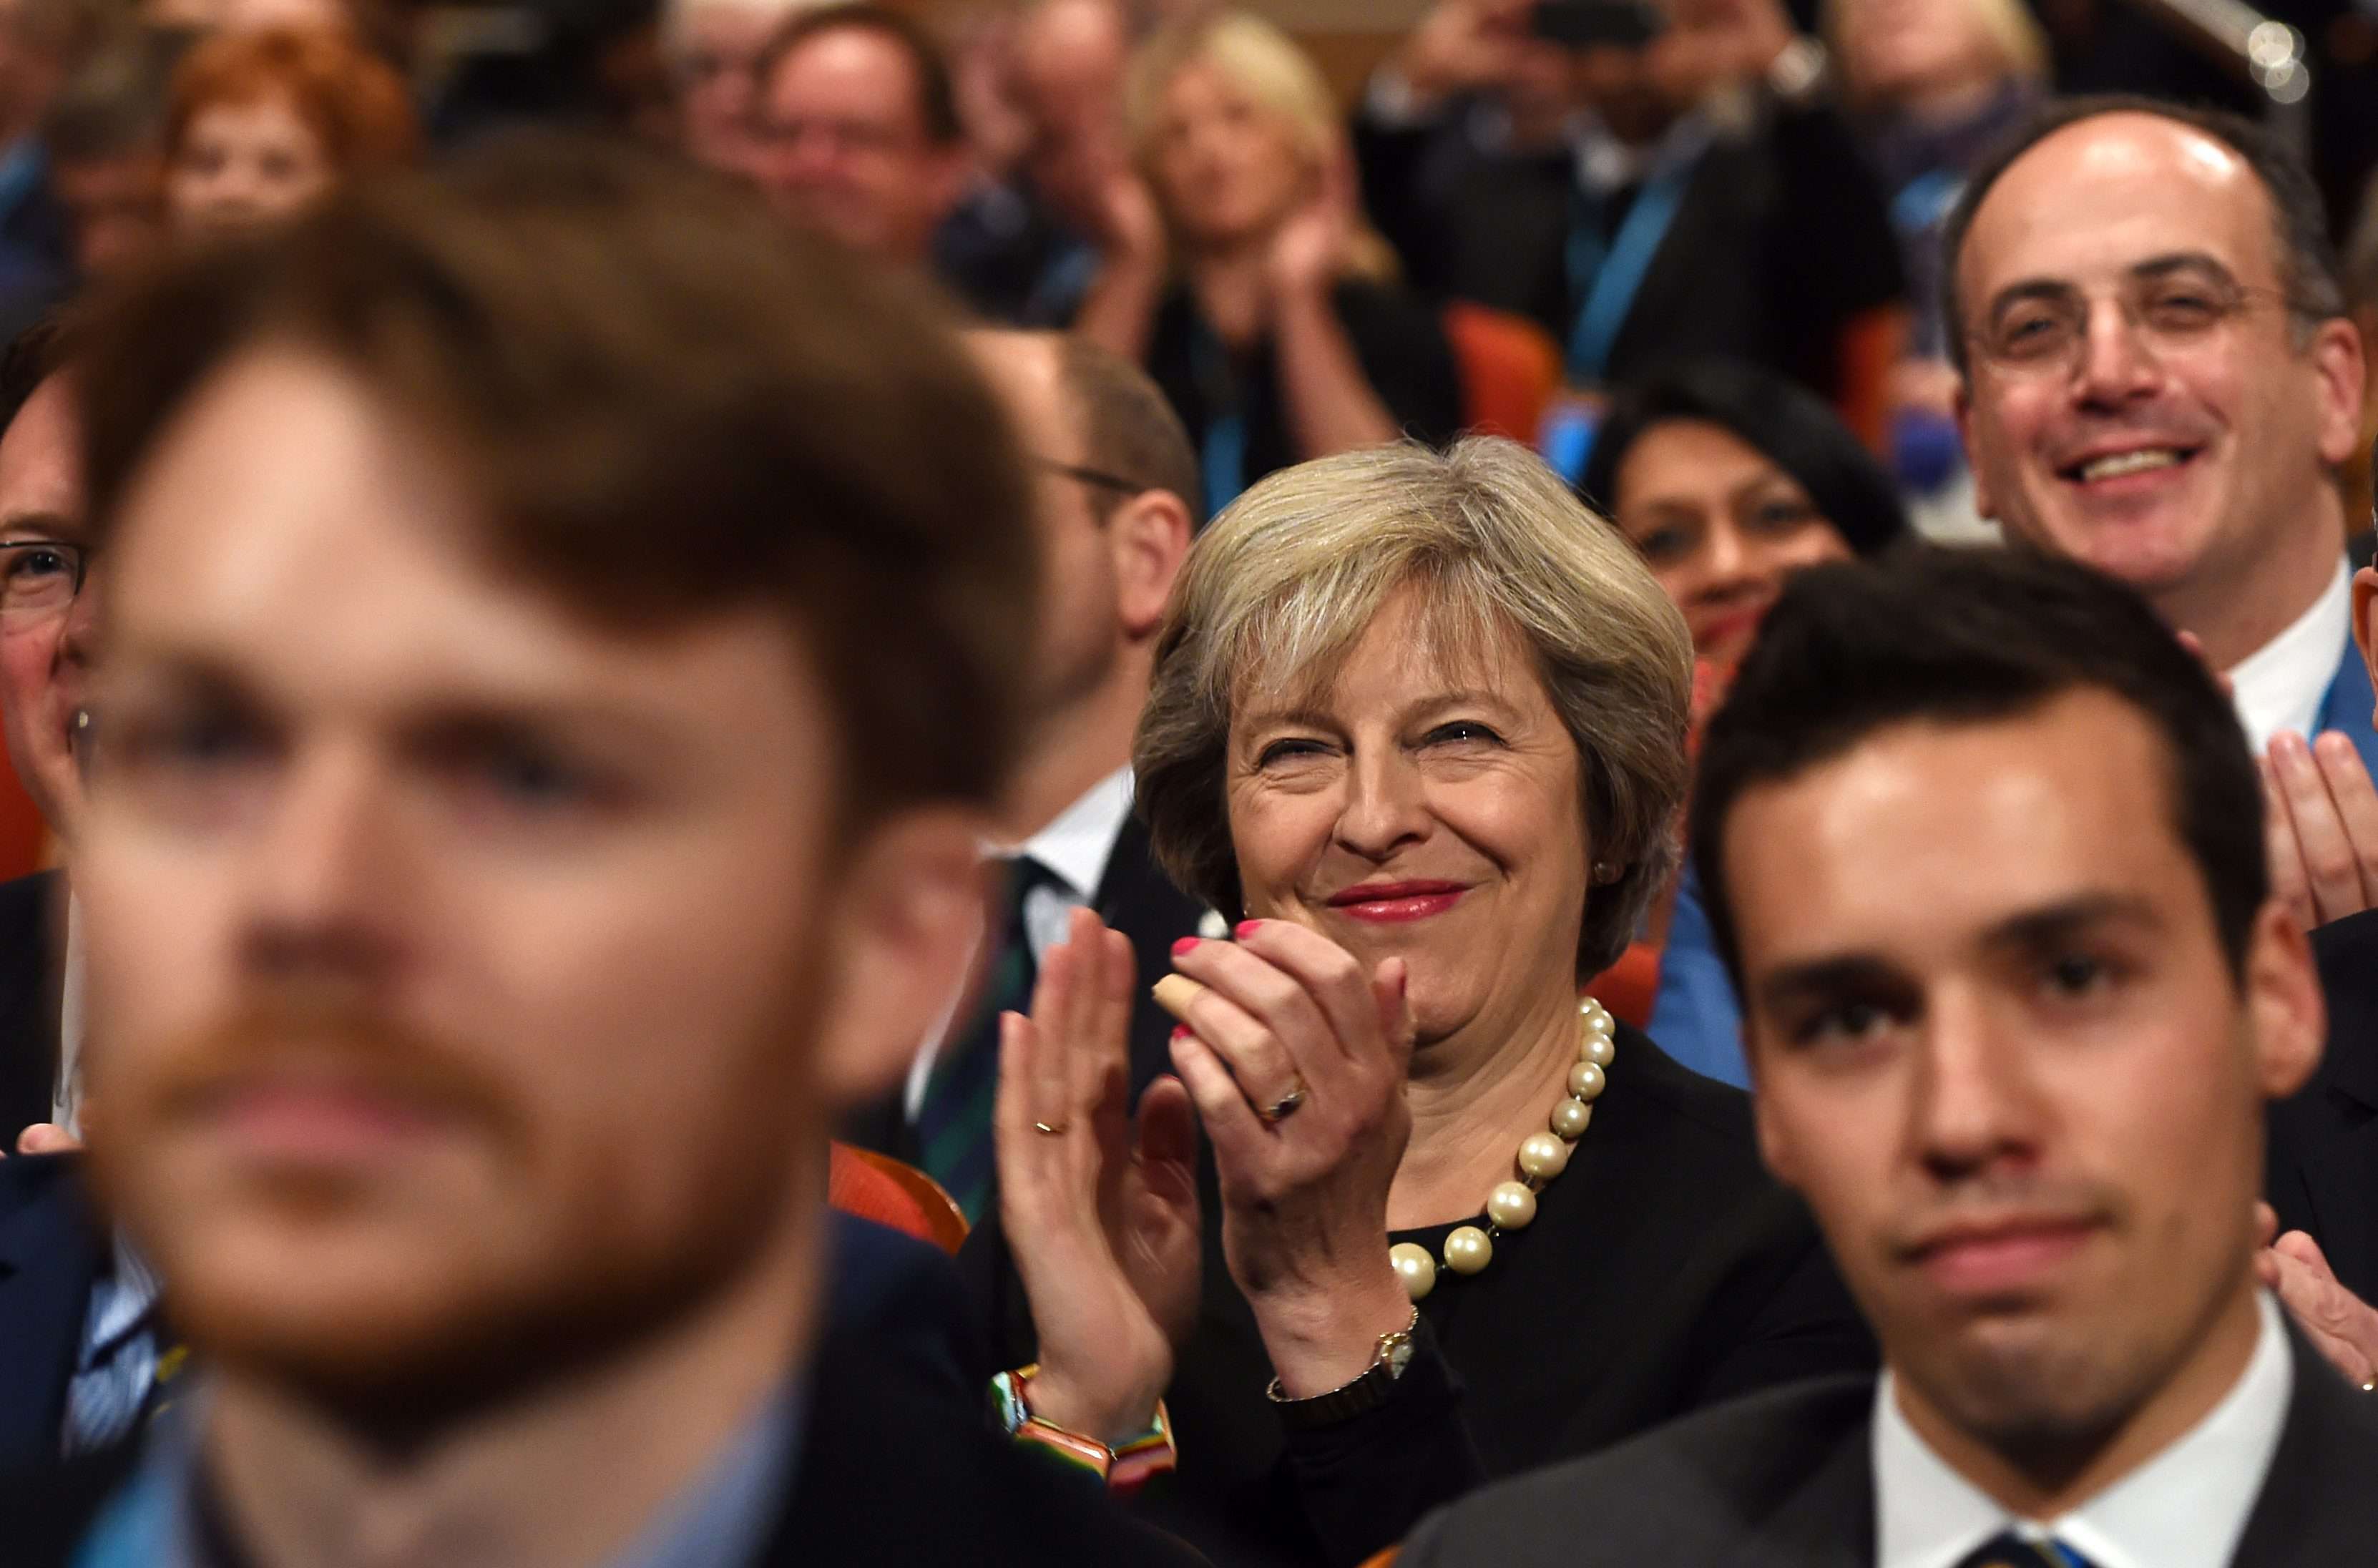 British Prime Minister Theresa May smiles as she listens to delegates during the Conservative Party conference in Birmingham. Photo: EPA